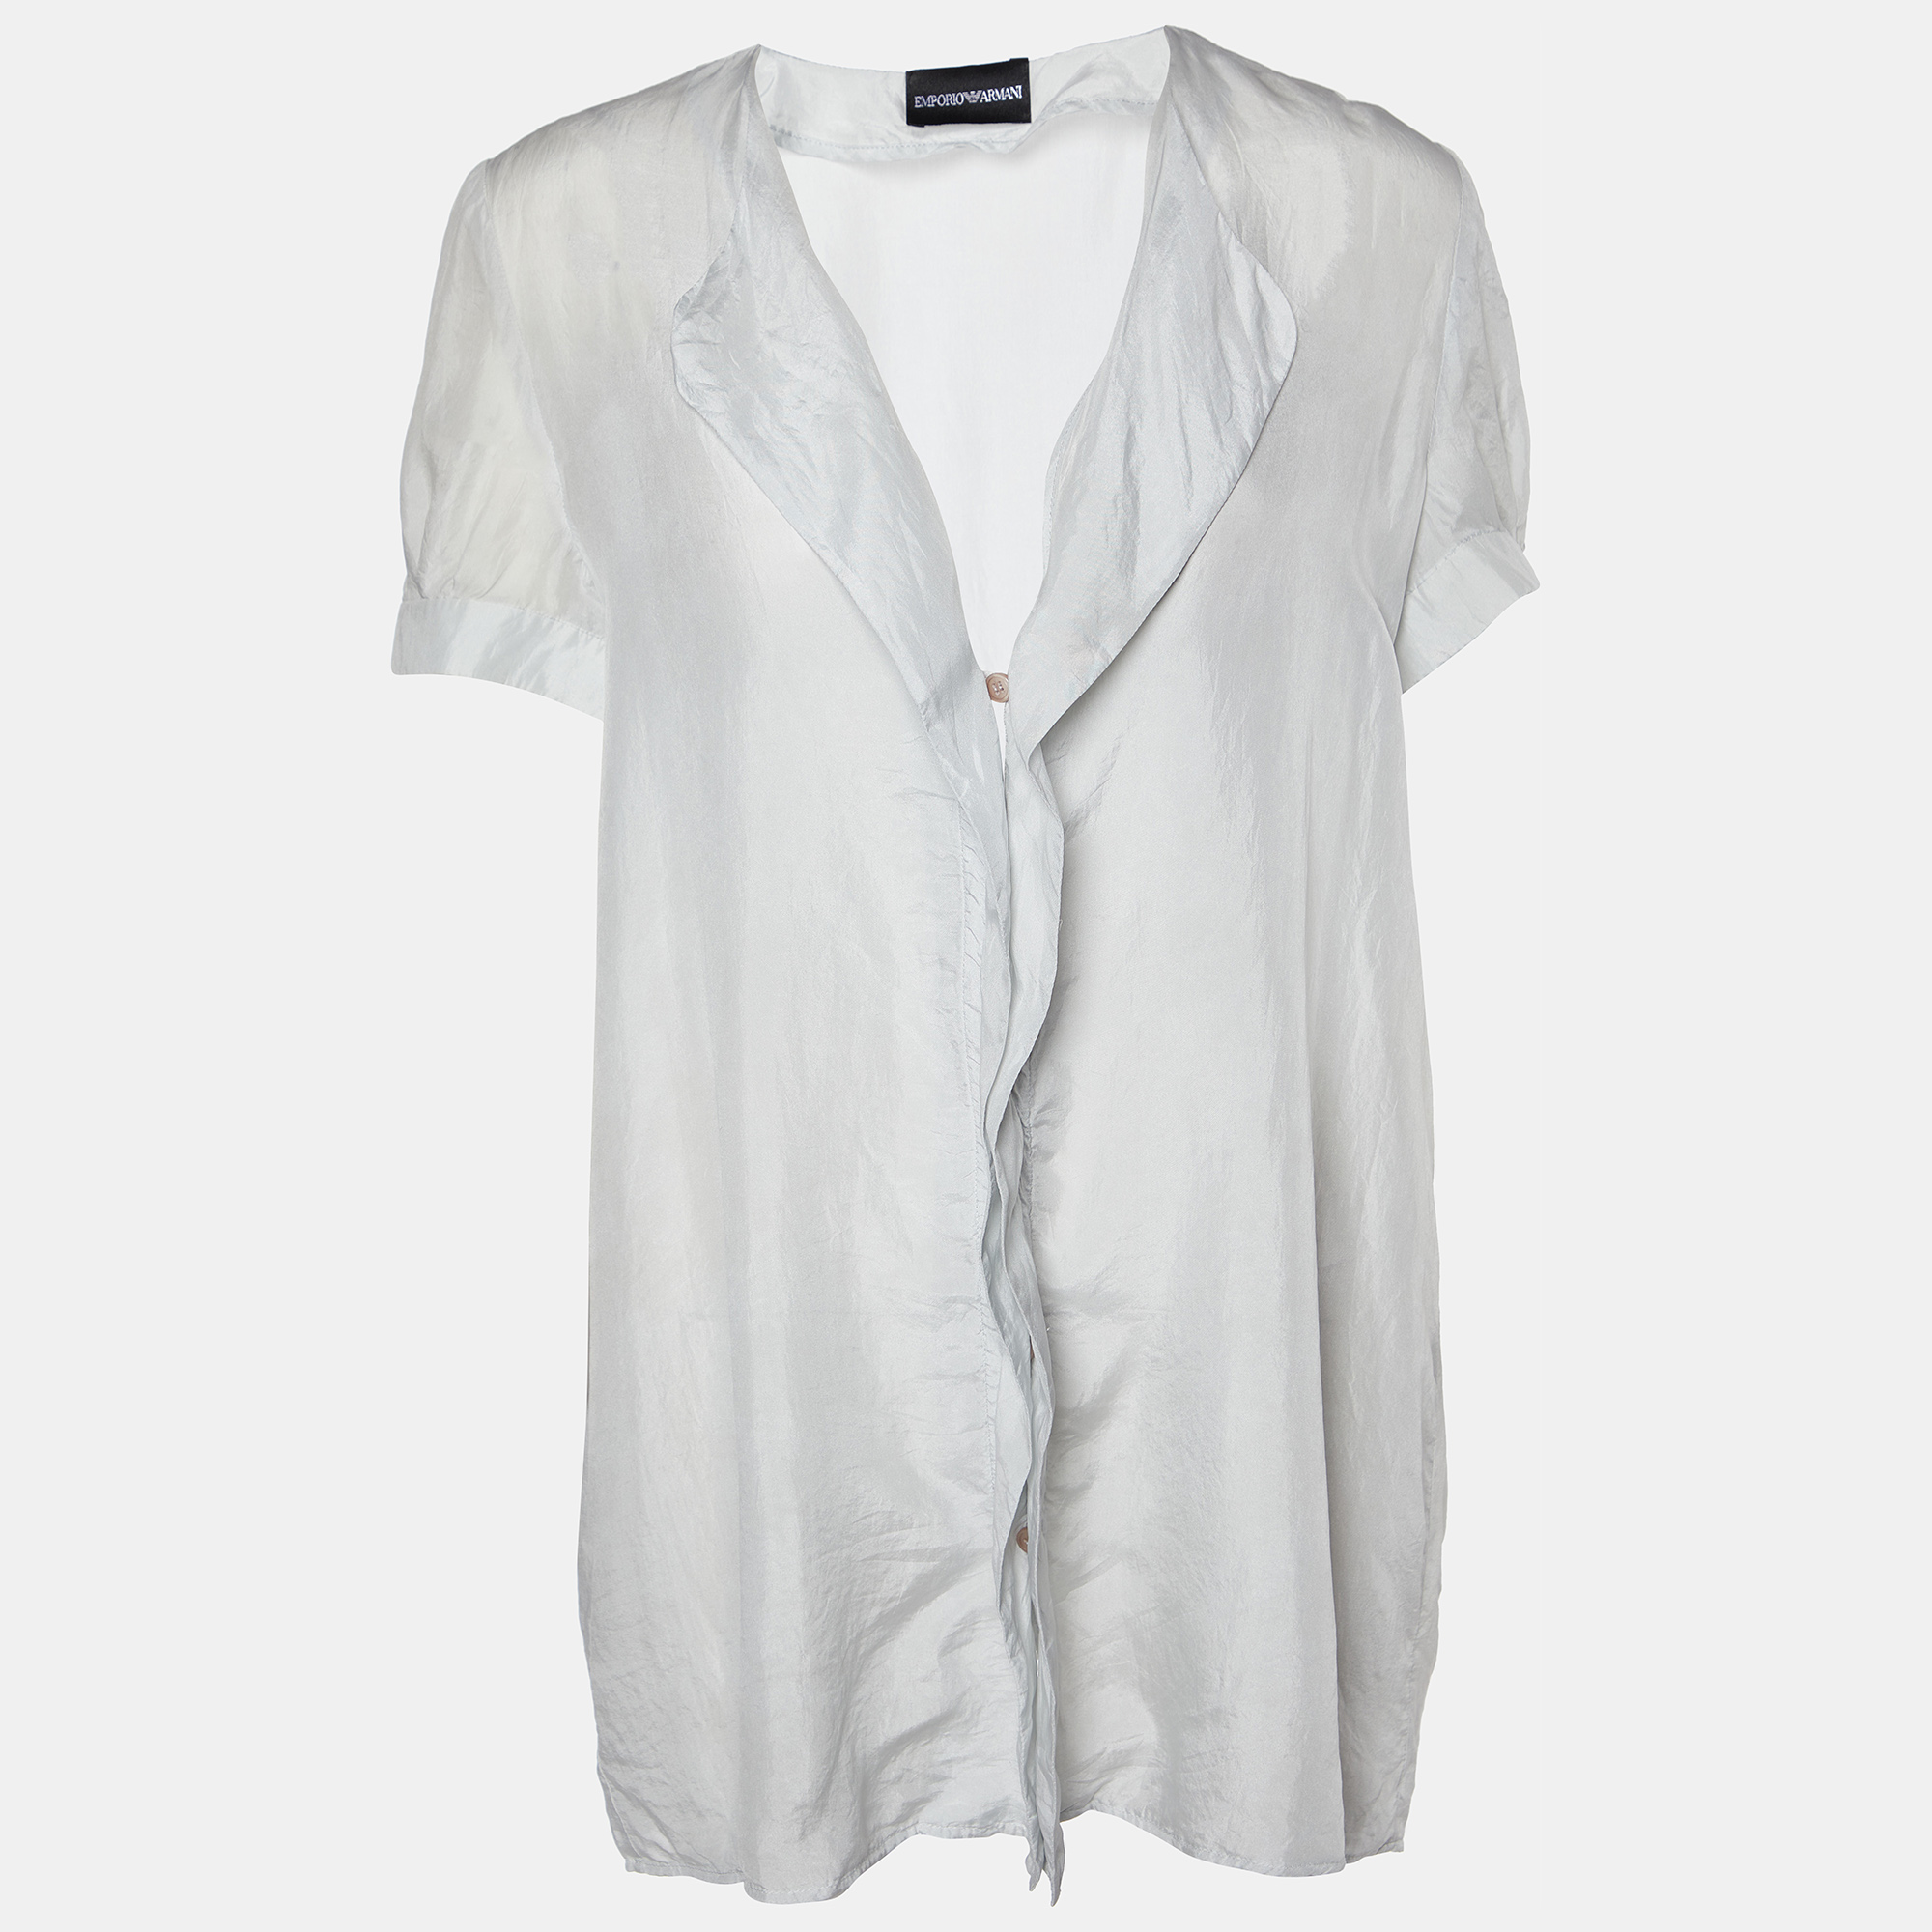 As shirts are an indispensable part of a wardrobe Emporio Armani brings you a creation that is both versatile and stylish. It has been tailored from high quality fabric for a classy look and fit.